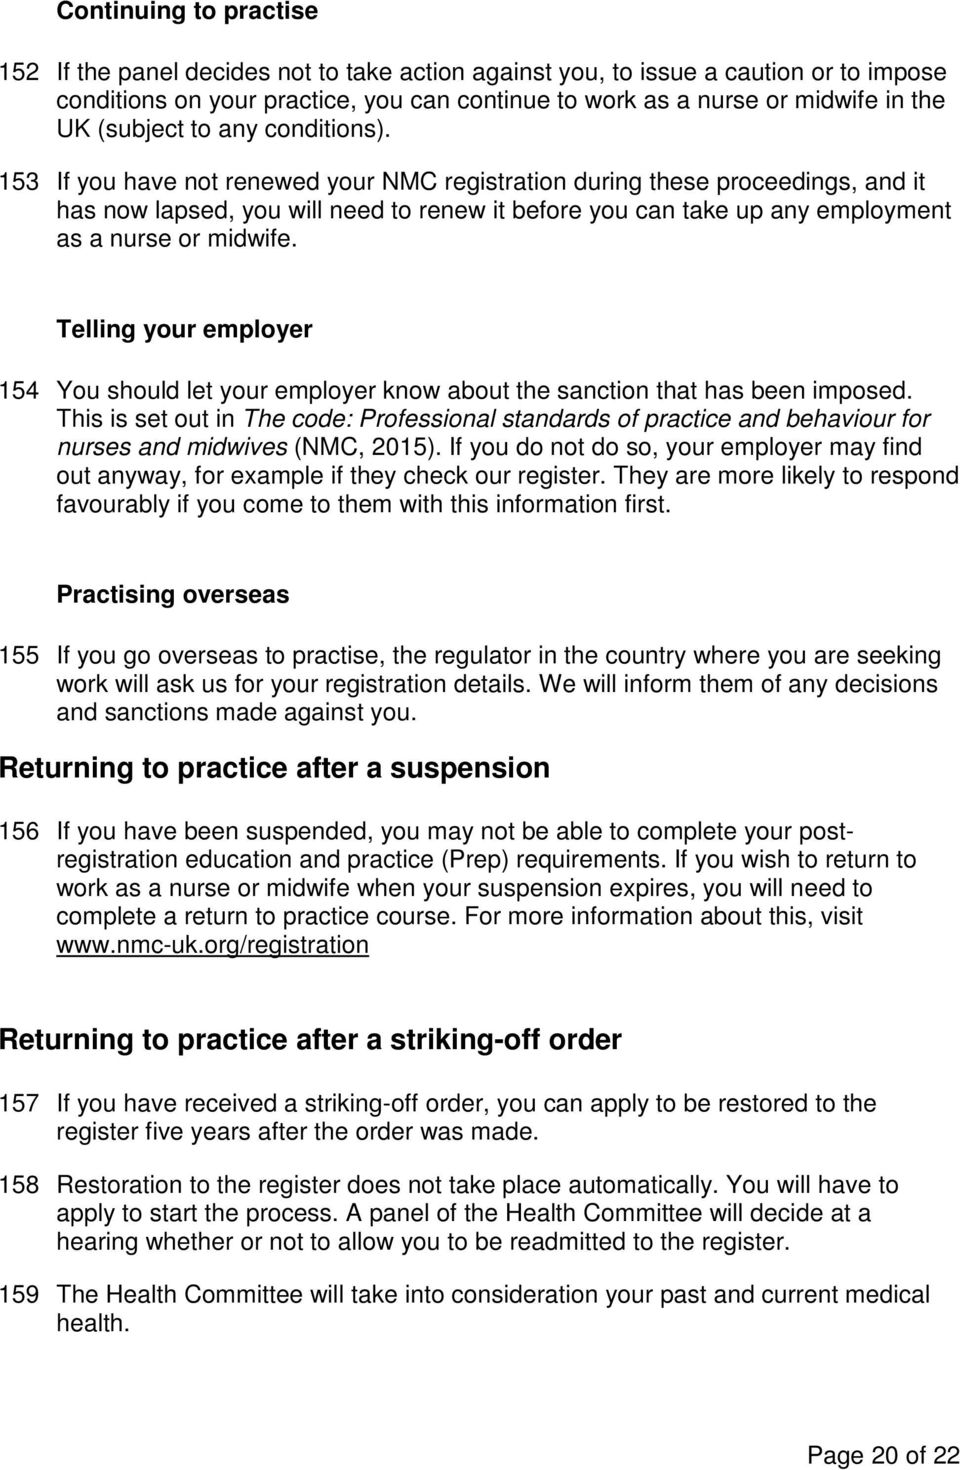 153 If you have not renewed your NMC registration during these proceedings, and it has now lapsed, you will need to renew it before you can take up any employment as a nurse or midwife.